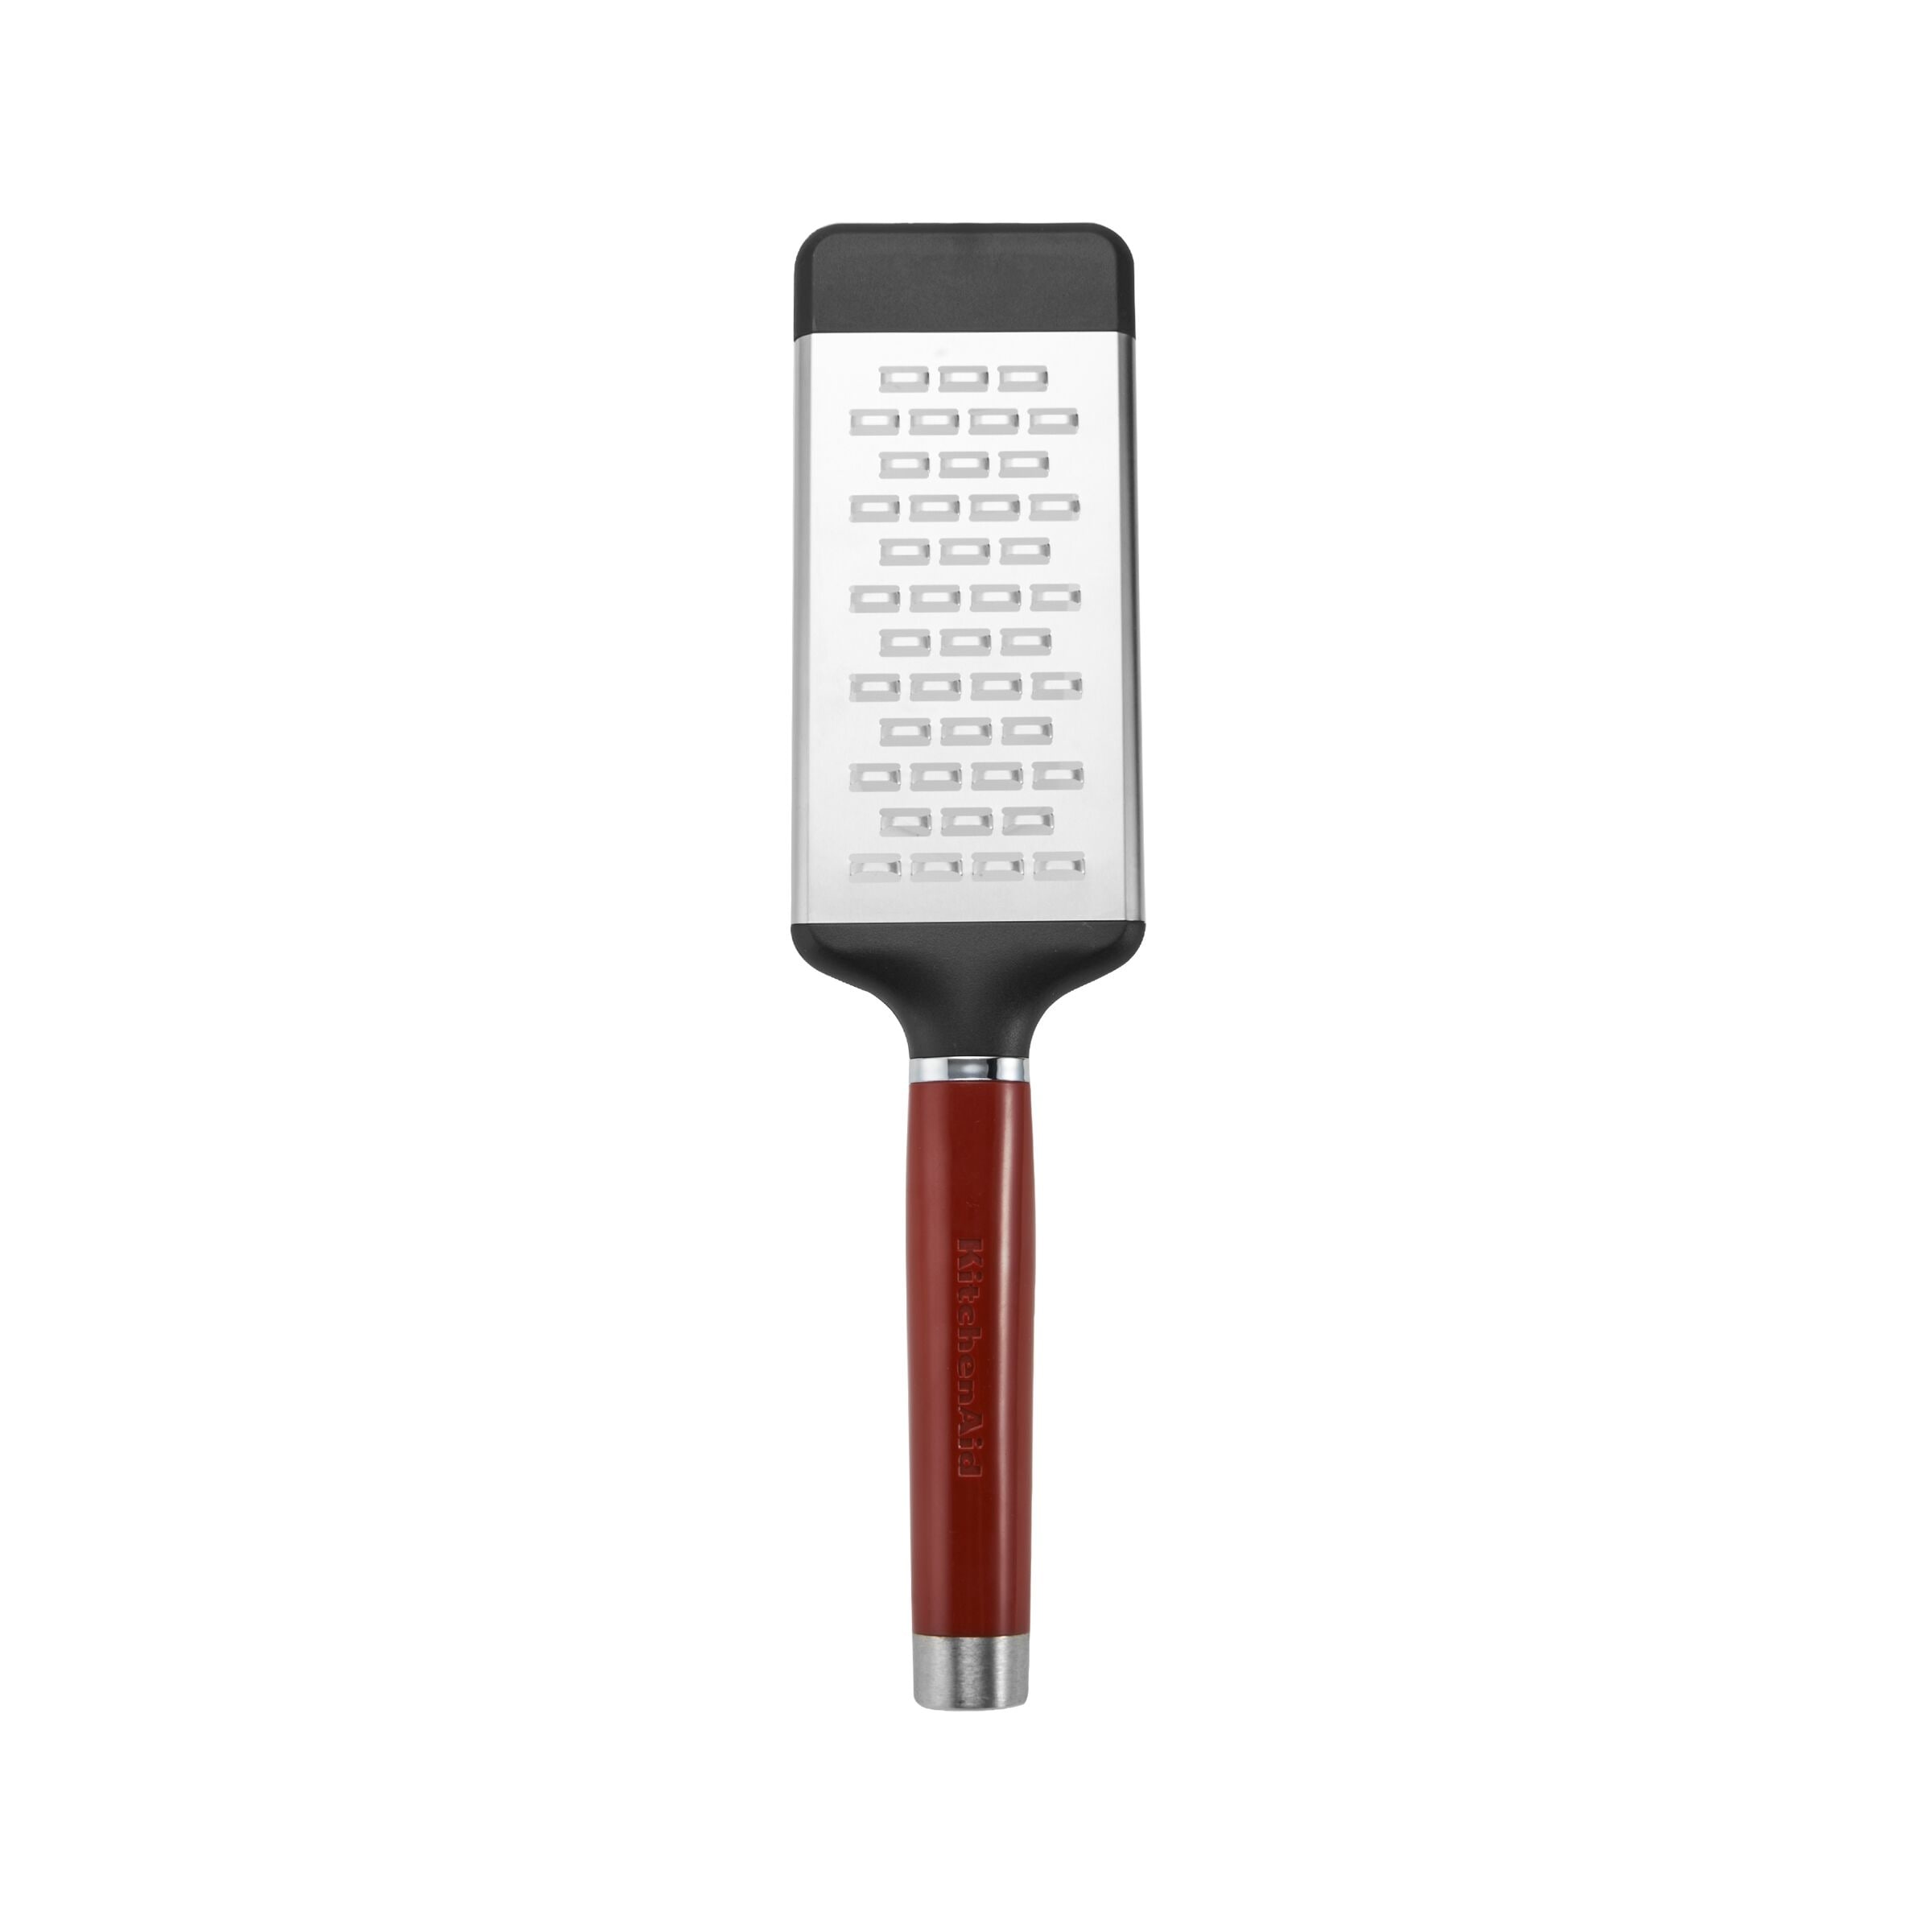 https://ak1.ostkcdn.com/images/products/is/images/direct/fb4f5c12caa7e7fe88a6855f7b24a90f1d7ac6f2/KitchenAid-SS-Medium-Flat-Grater%2C-Red.jpg